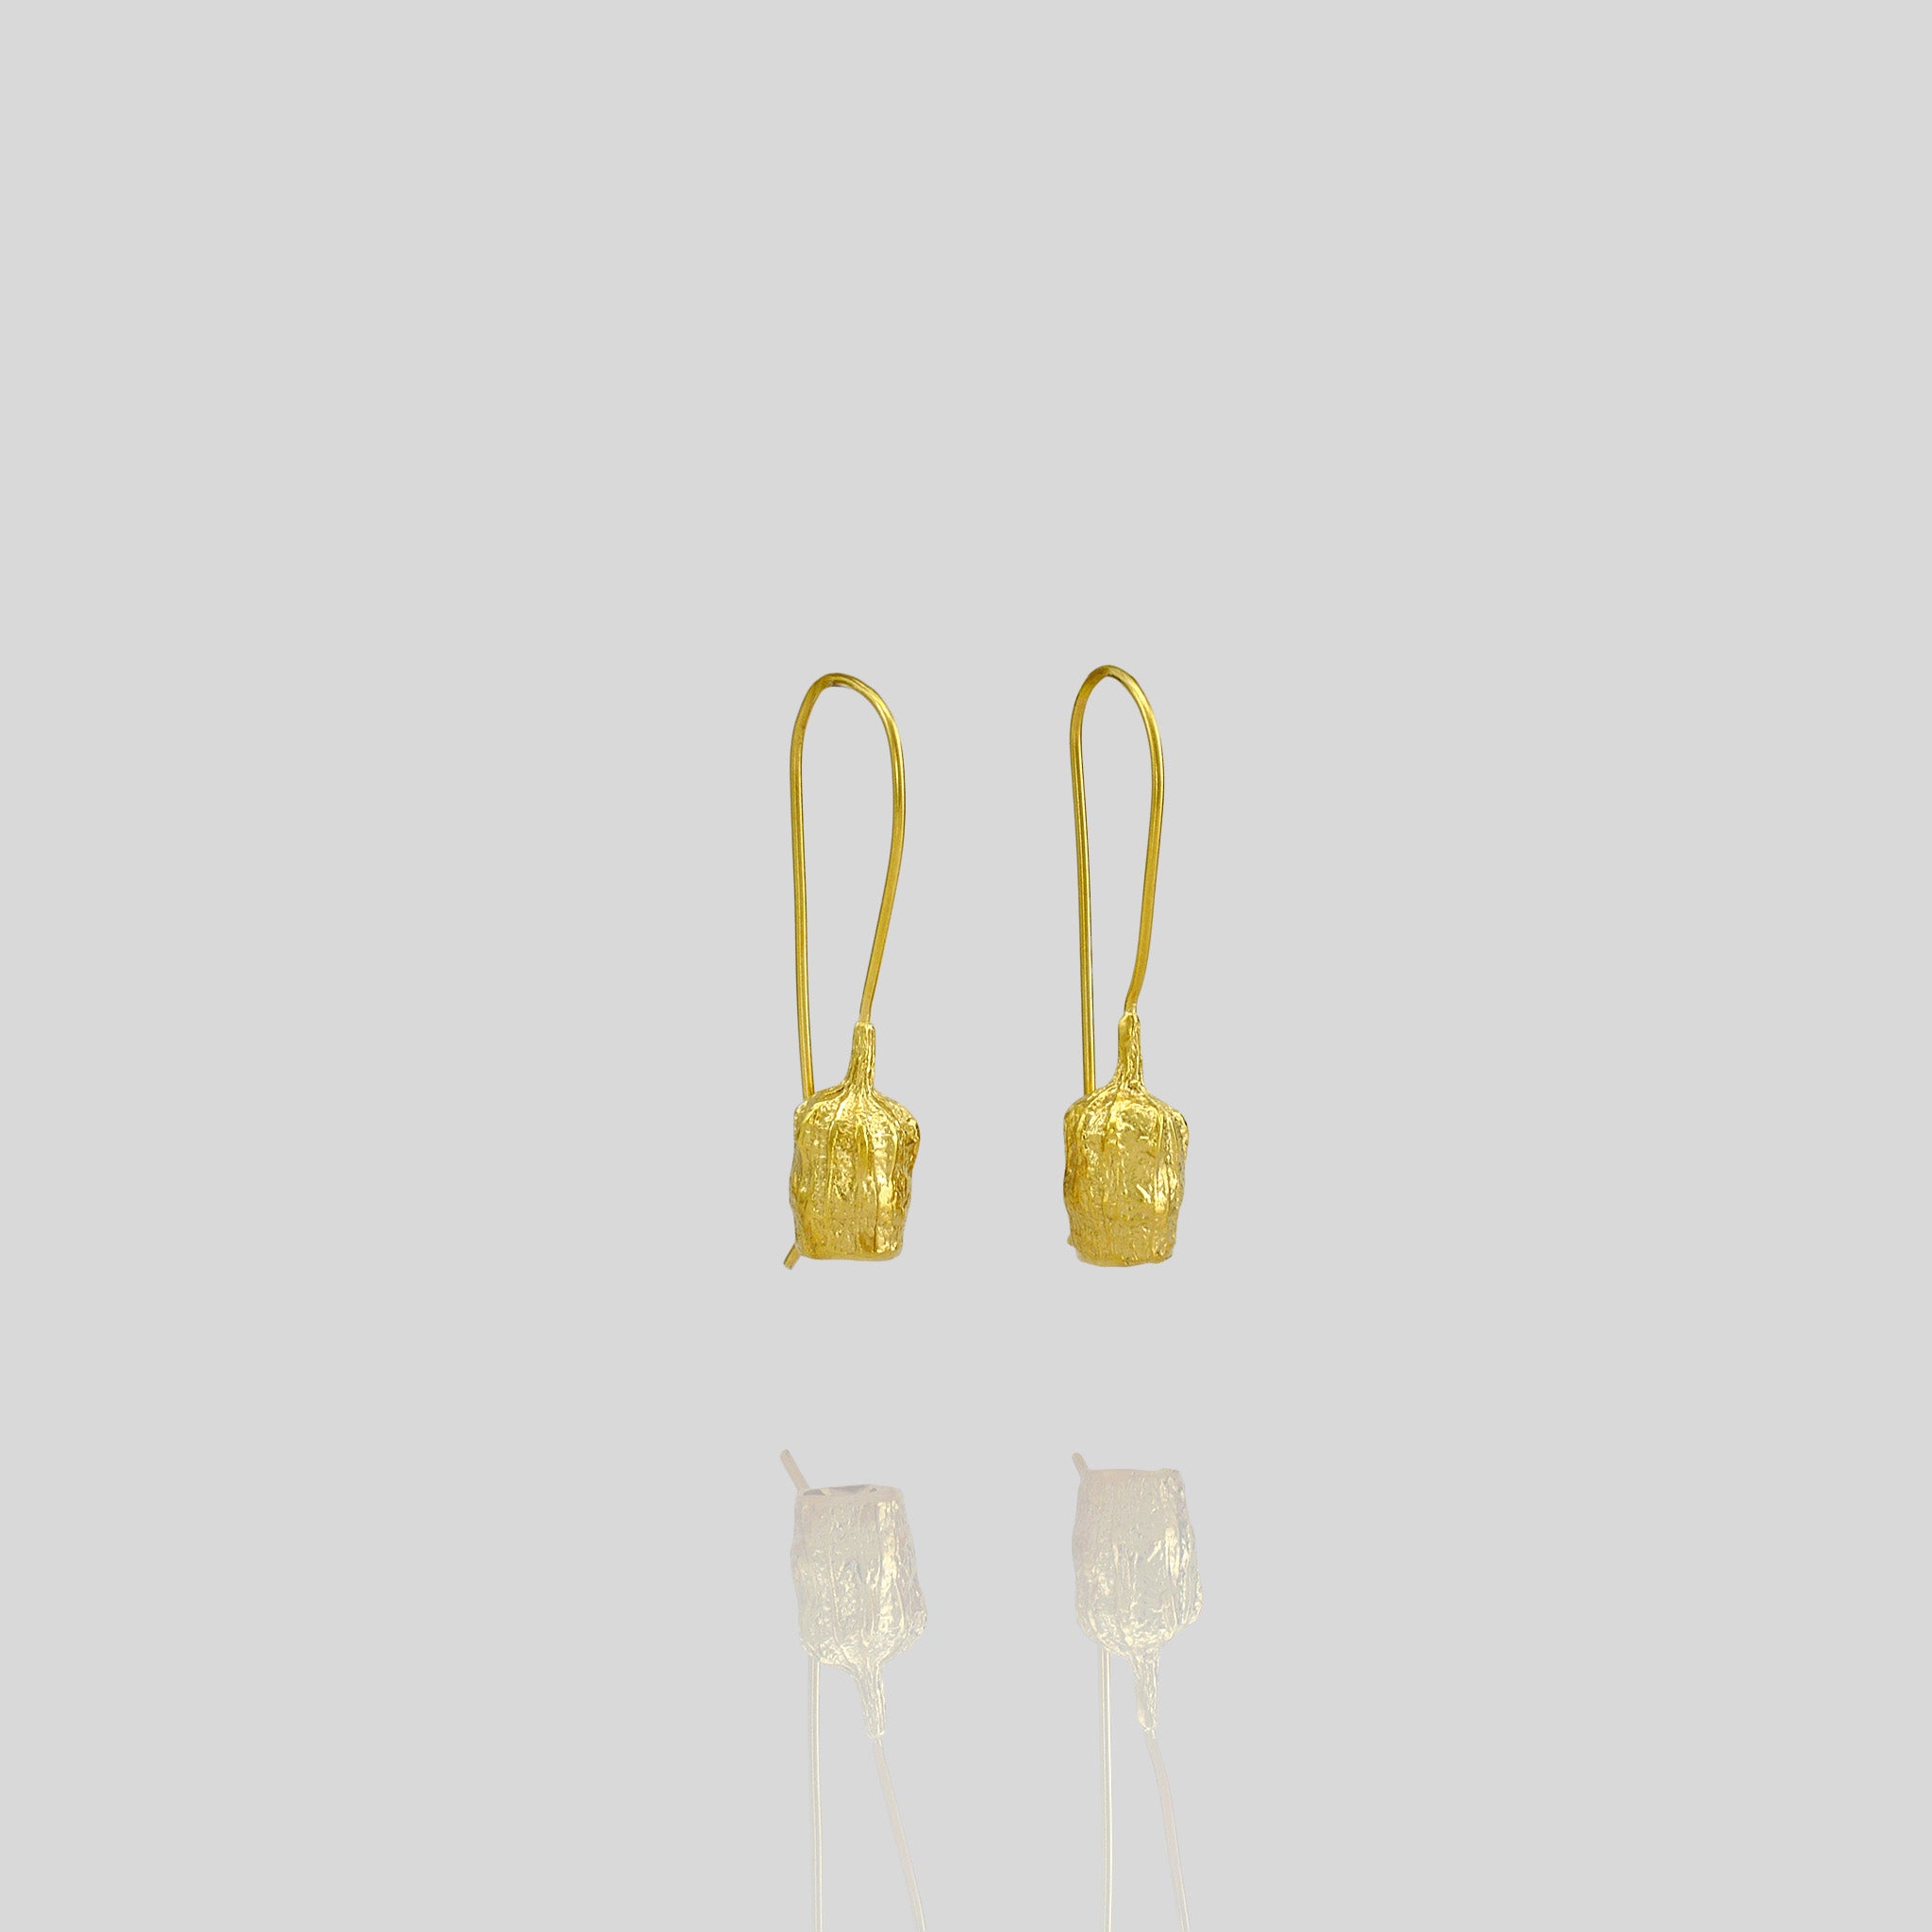 Gold drop earrings featuring a bell-shaped seed, which is a replica of a dried seed collected from nature.